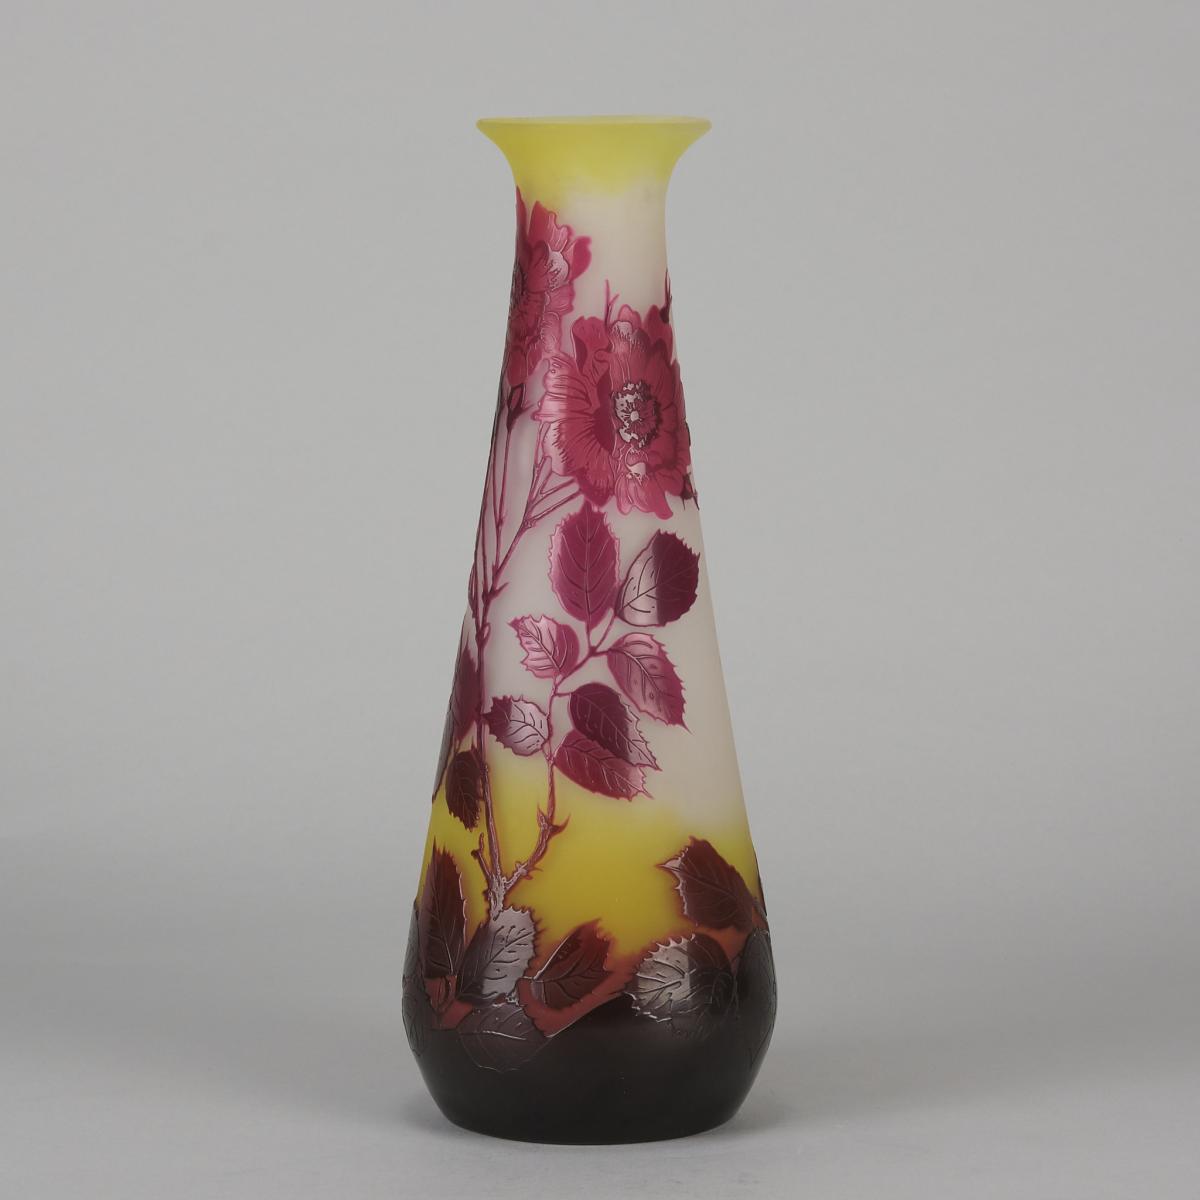 Early 20th Century Cameo Glass Vase entitled "Wild Roses Vase" by Emile Gallé